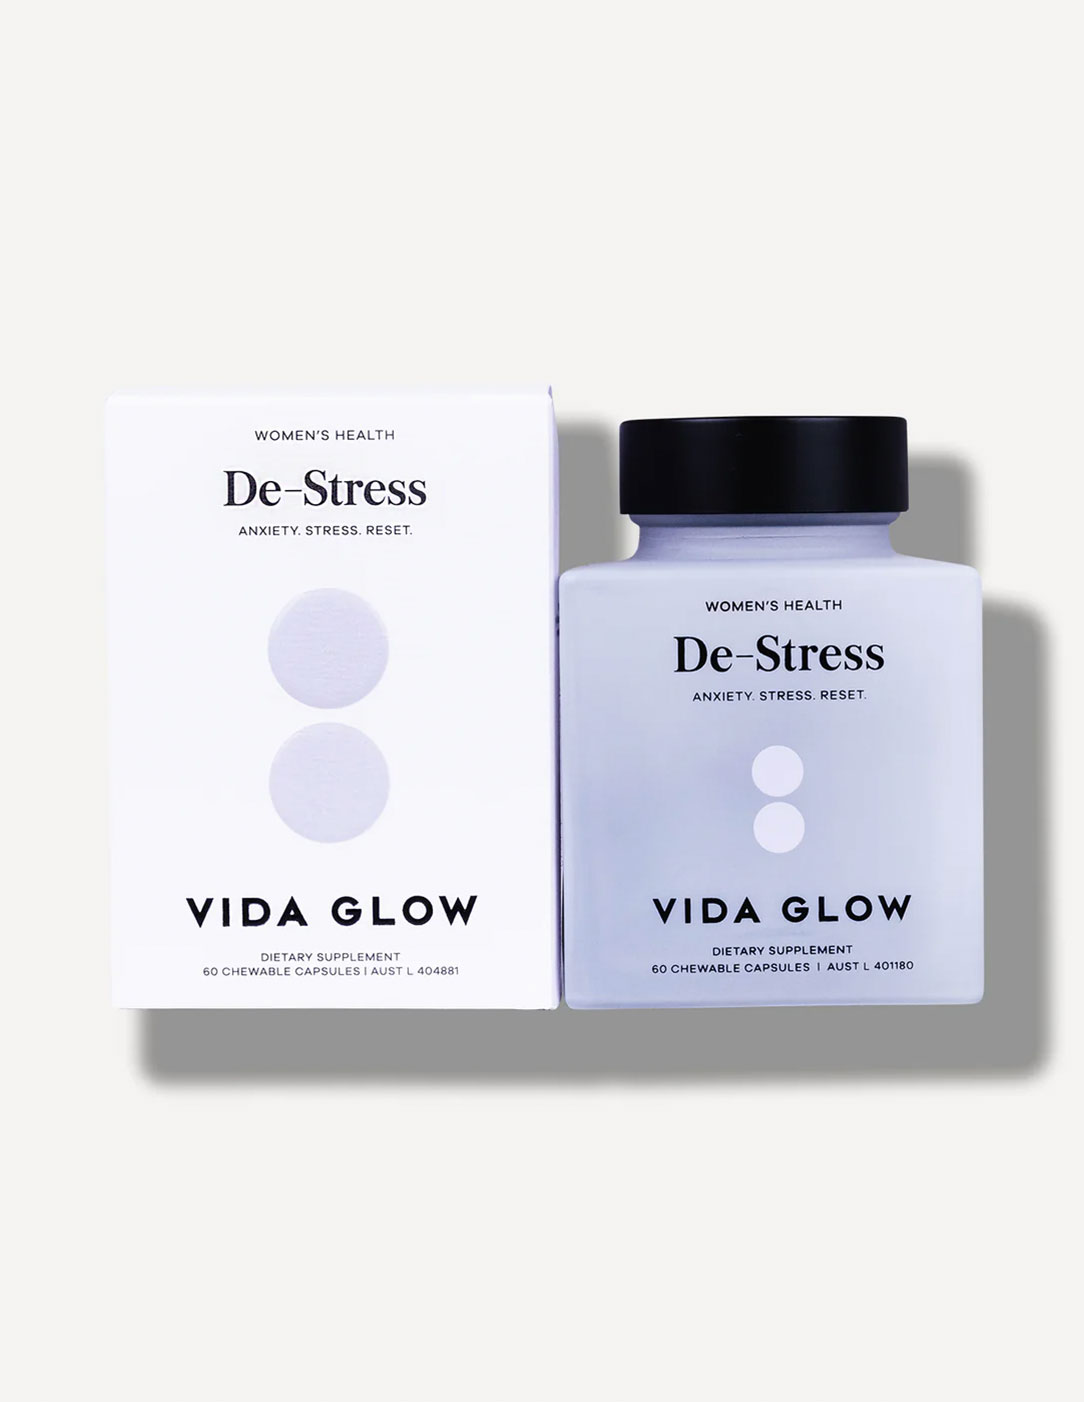 Vida Glow’s De-Stress supplement relieves symptoms of stress and mild anxiety